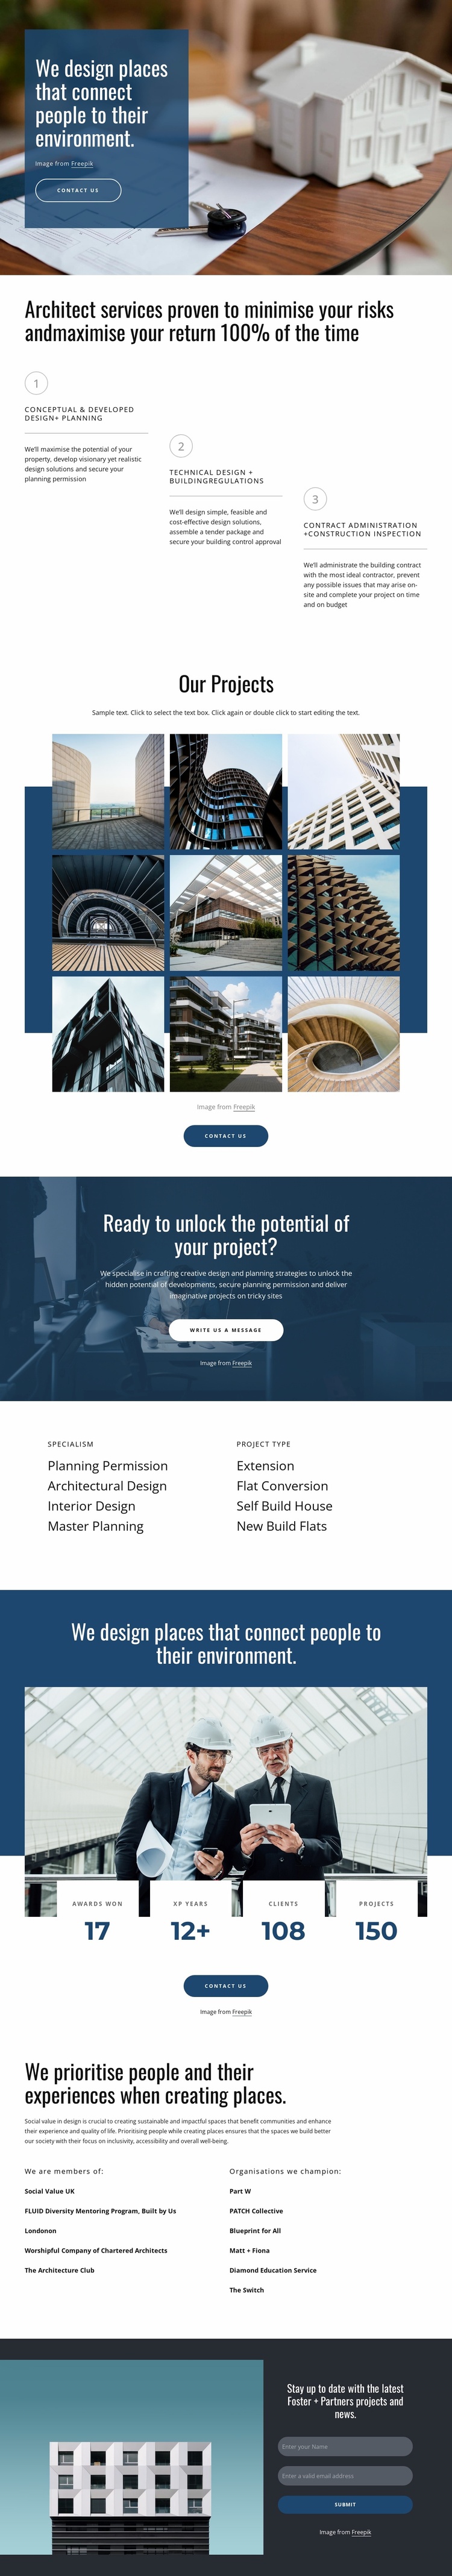 We design amazing projects Website Template